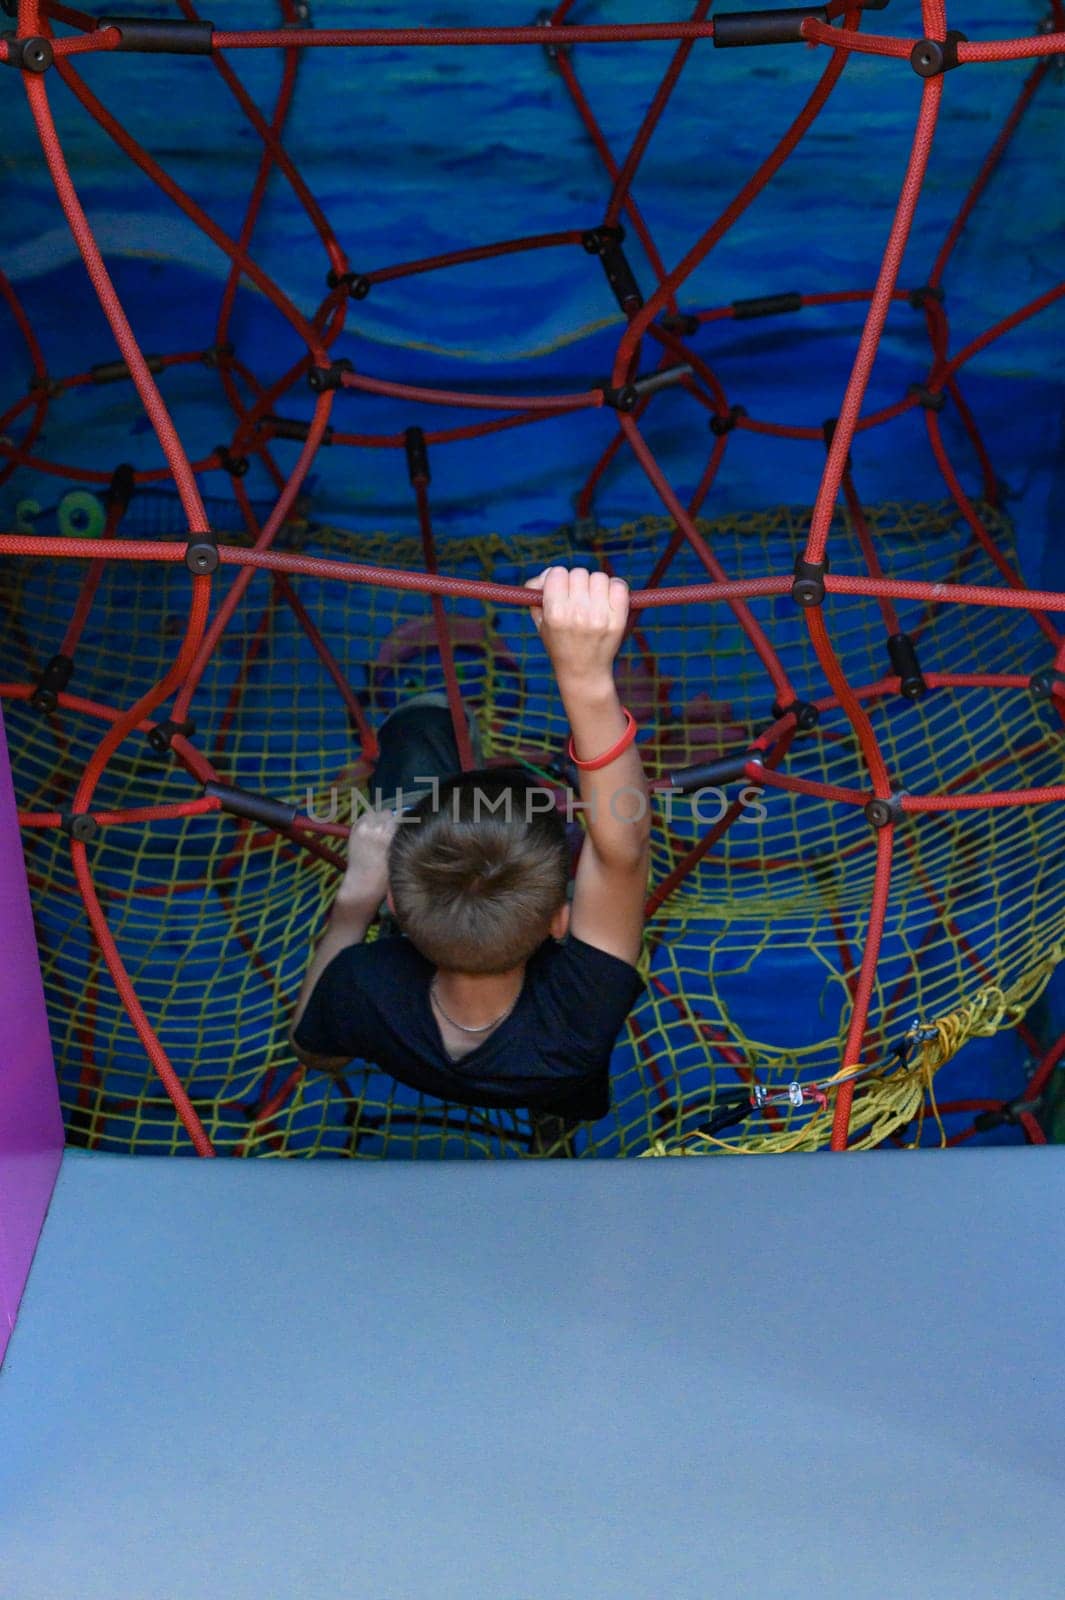 The boy climbs up the labyrinth with a web, children's activity in the playroom.